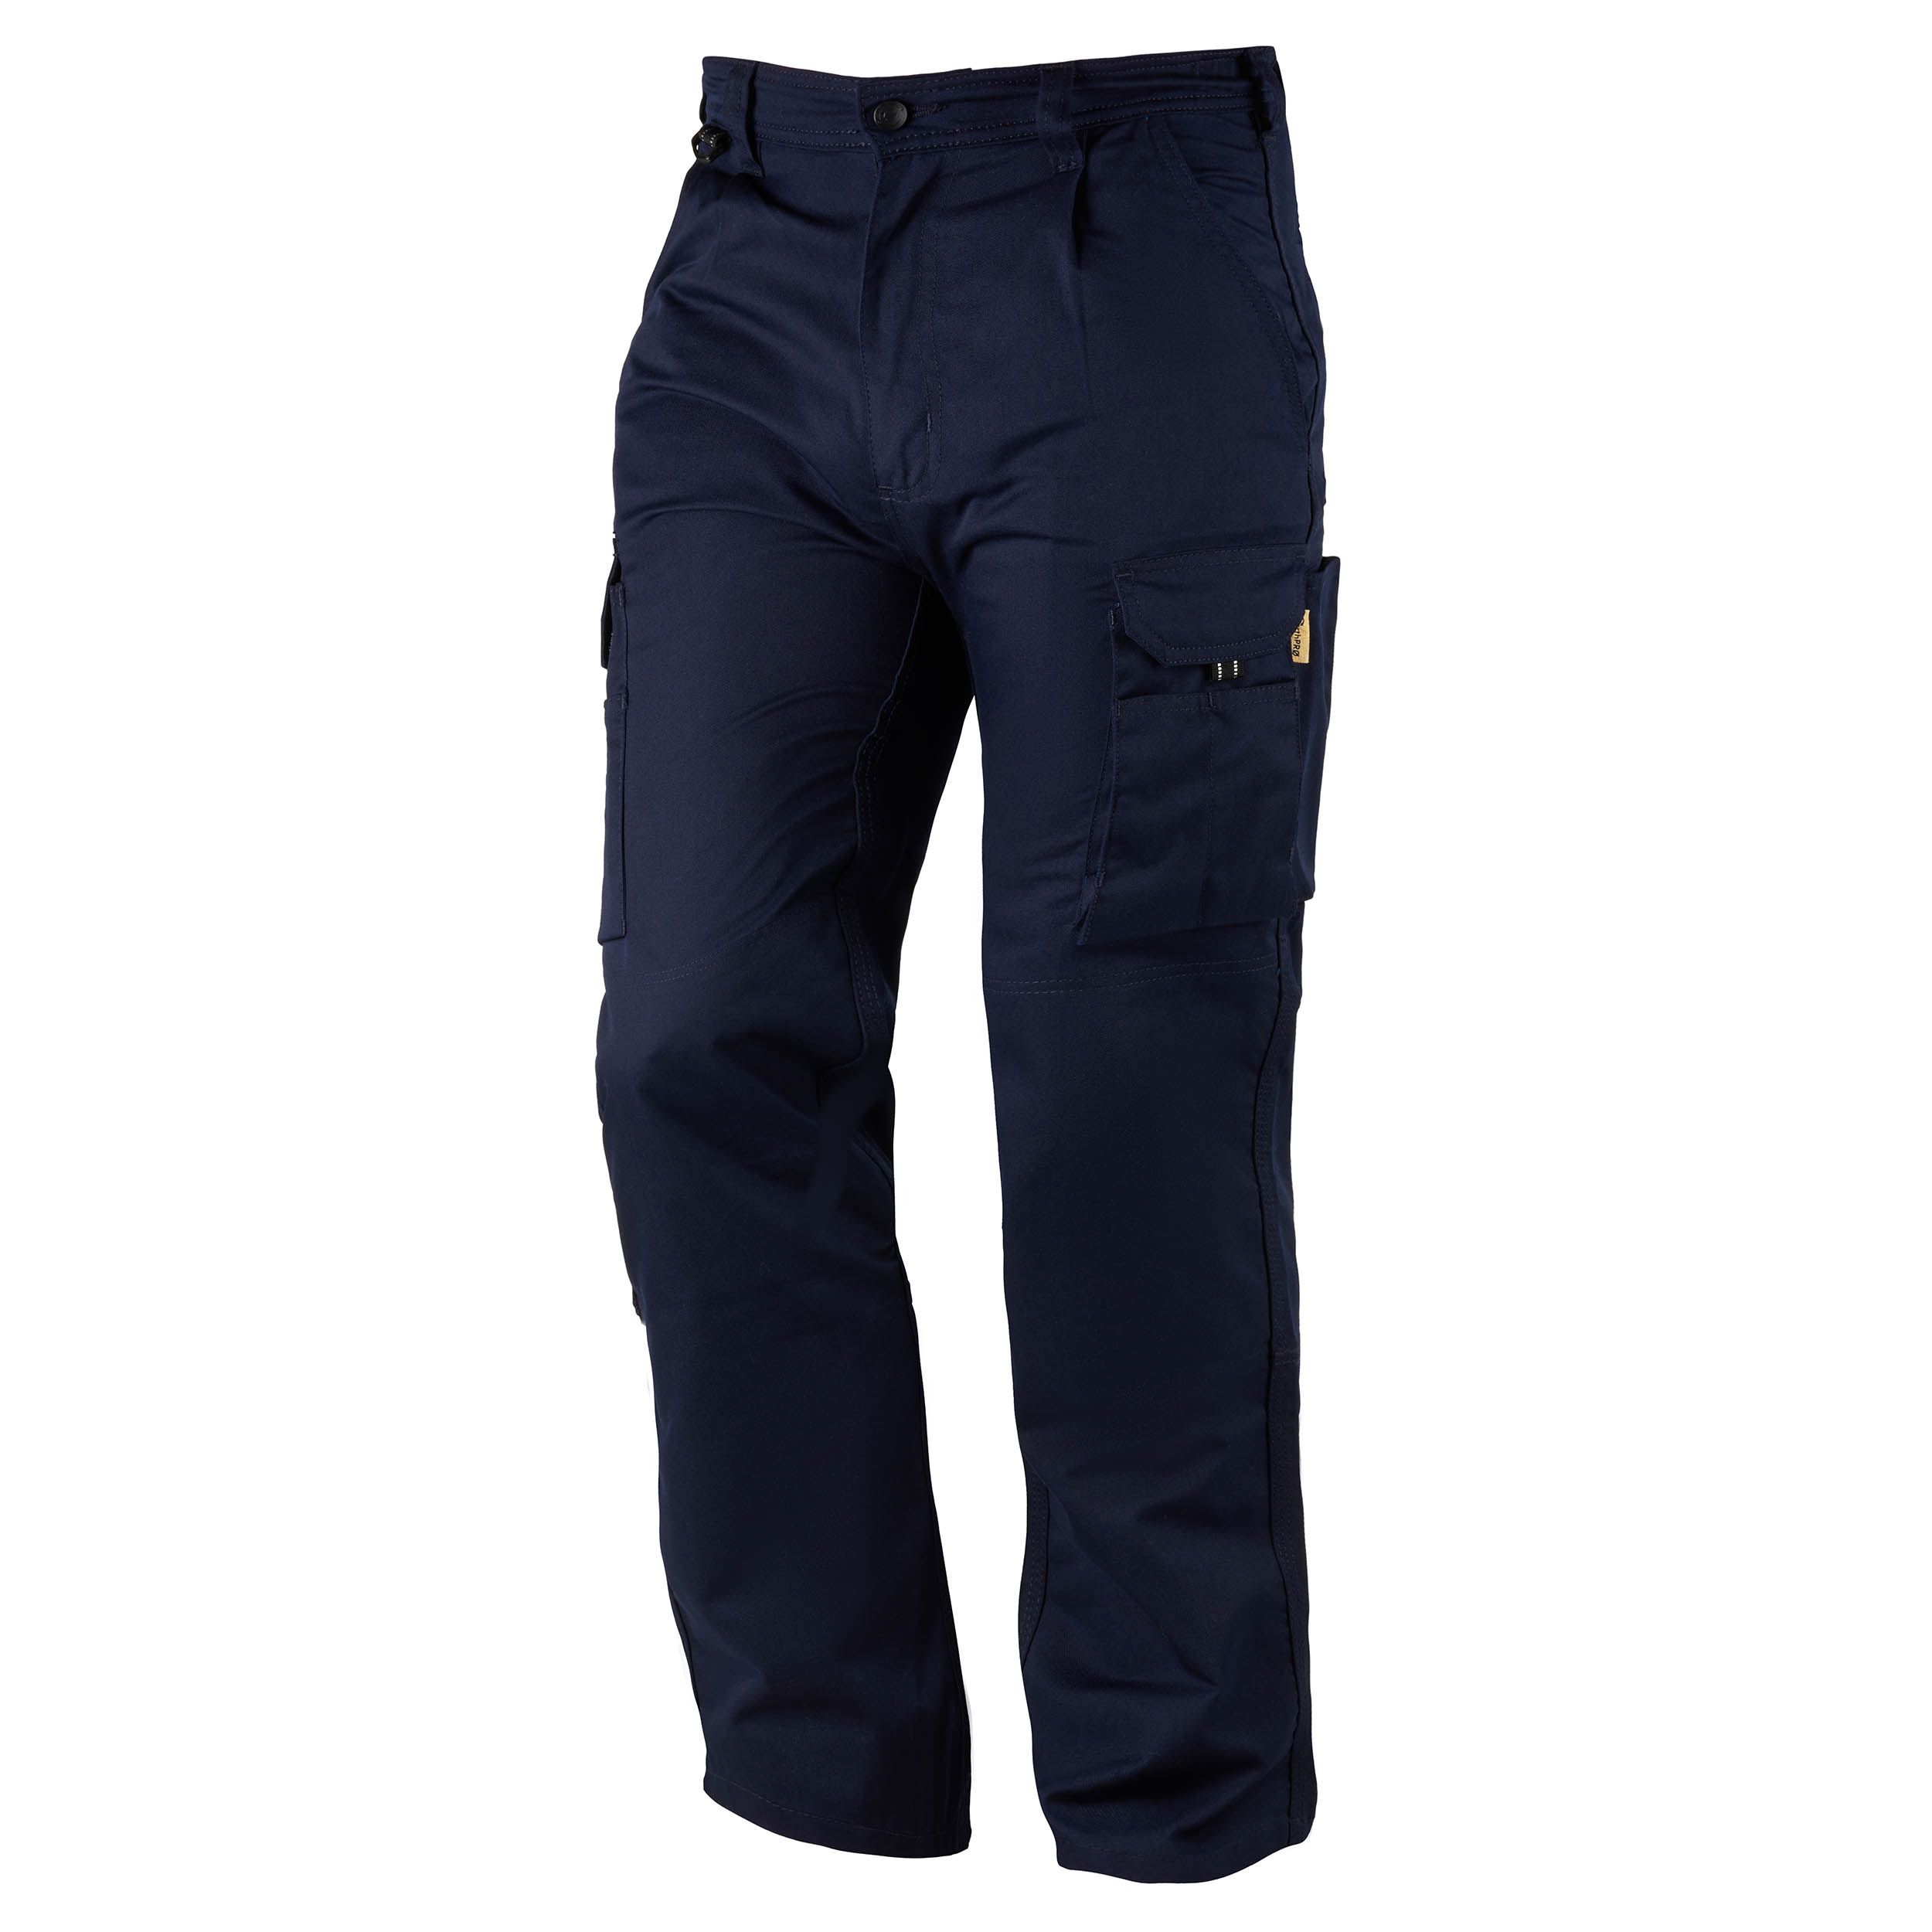 Orn Hawk EarthPro Combat Trouser Navy Men's Cotton, Recycled Polyester Trousers 40in, 99cm Waist